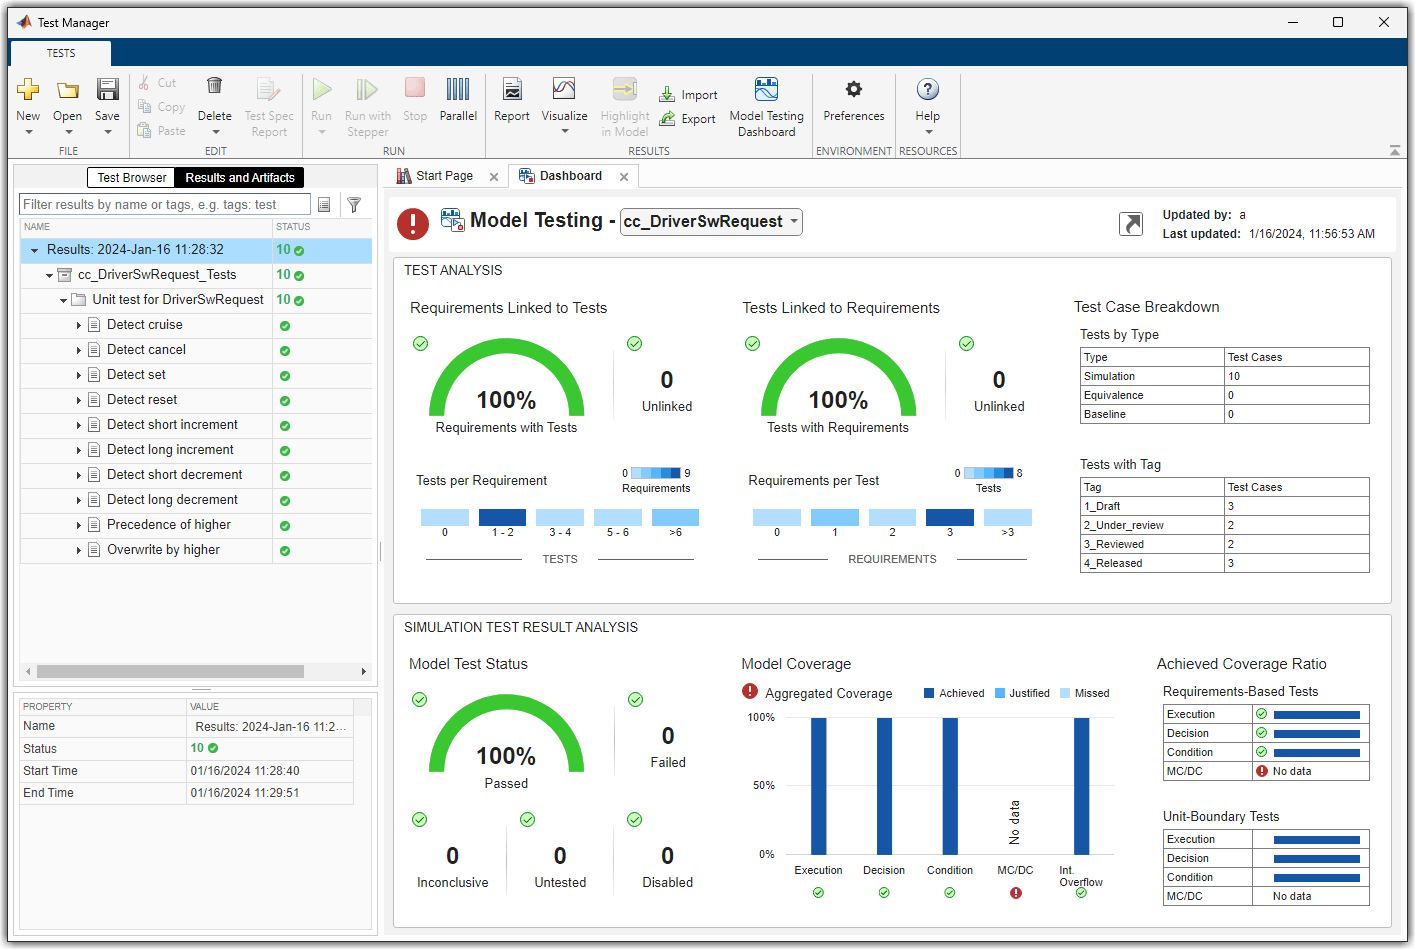 Test Manager with Dashboard tab showing model testing metric results for a model